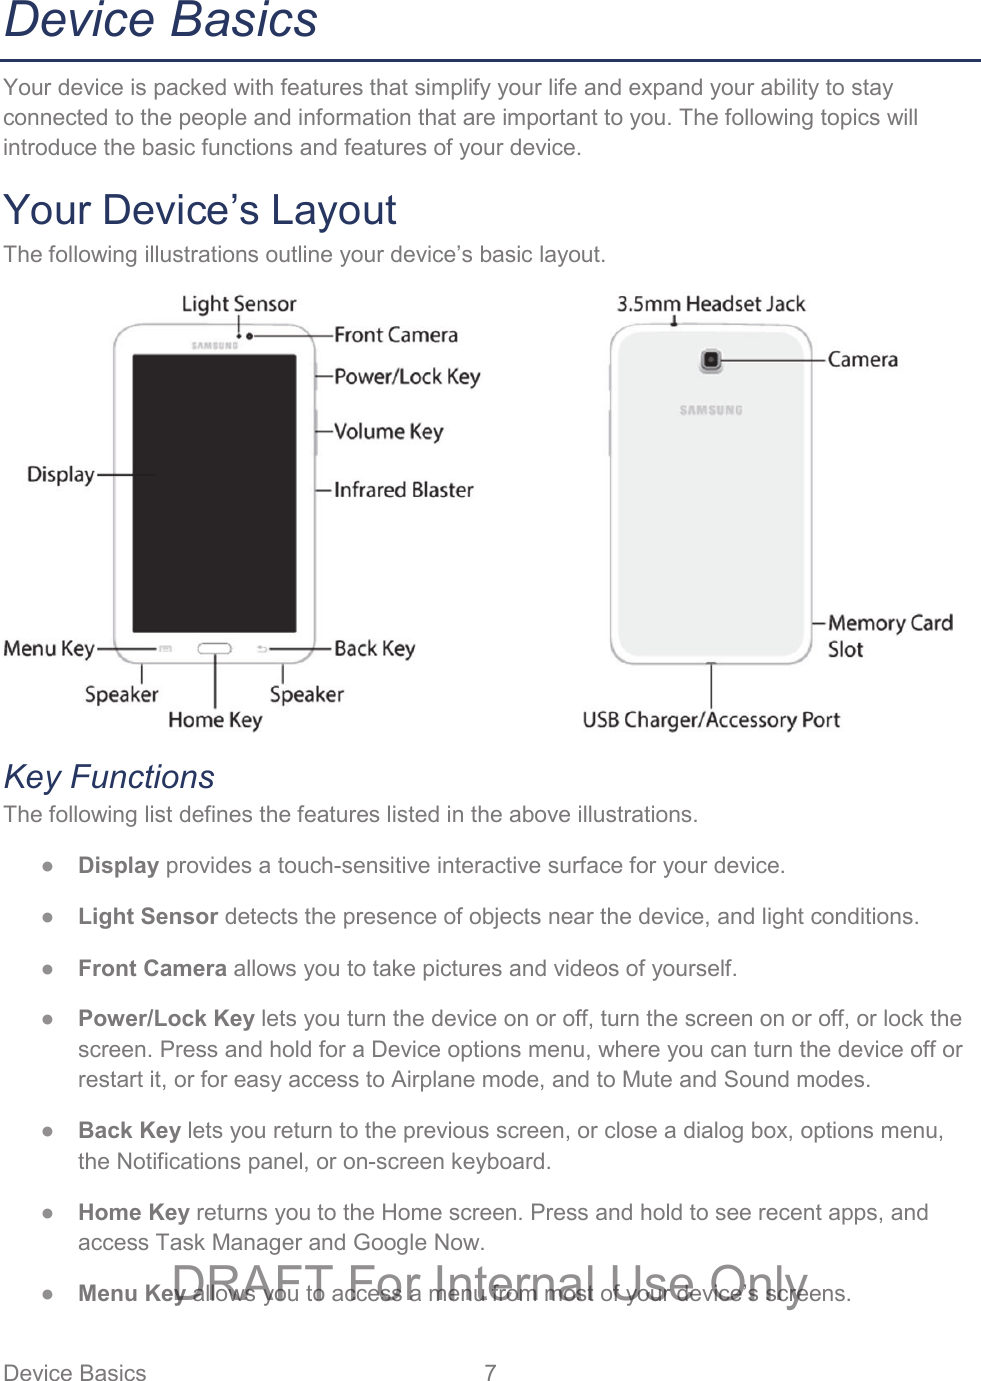 Device Basics  7   Device Basics Your device is packed with features that simplify your life and expand your ability to stay connected to the people and information that are important to you. The following topics will introduce the basic functions and features of your device. Your Device’s Layout The following illustrations outline your device’s basic layout.   Key Functions The following list defines the features listed in the above illustrations. ● Display provides a touch-sensitive interactive surface for your device.  ● Light Sensor detects the presence of objects near the device, and light conditions. ● Front Camera allows you to take pictures and videos of yourself. ● Power/Lock Key lets you turn the device on or off, turn the screen on or off, or lock the screen. Press and hold for a Device options menu, where you can turn the device off or restart it, or for easy access to Airplane mode, and to Mute and Sound modes. ● Back Key lets you return to the previous screen, or close a dialog box, options menu, the Notifications panel, or on-screen keyboard. ● Home Key returns you to the Home screen. Press and hold to see recent apps, and access Task Manager and Google Now. ● Menu Key allows you to access a menu from most of your device’s screens. DRAFT For Internal Use Only